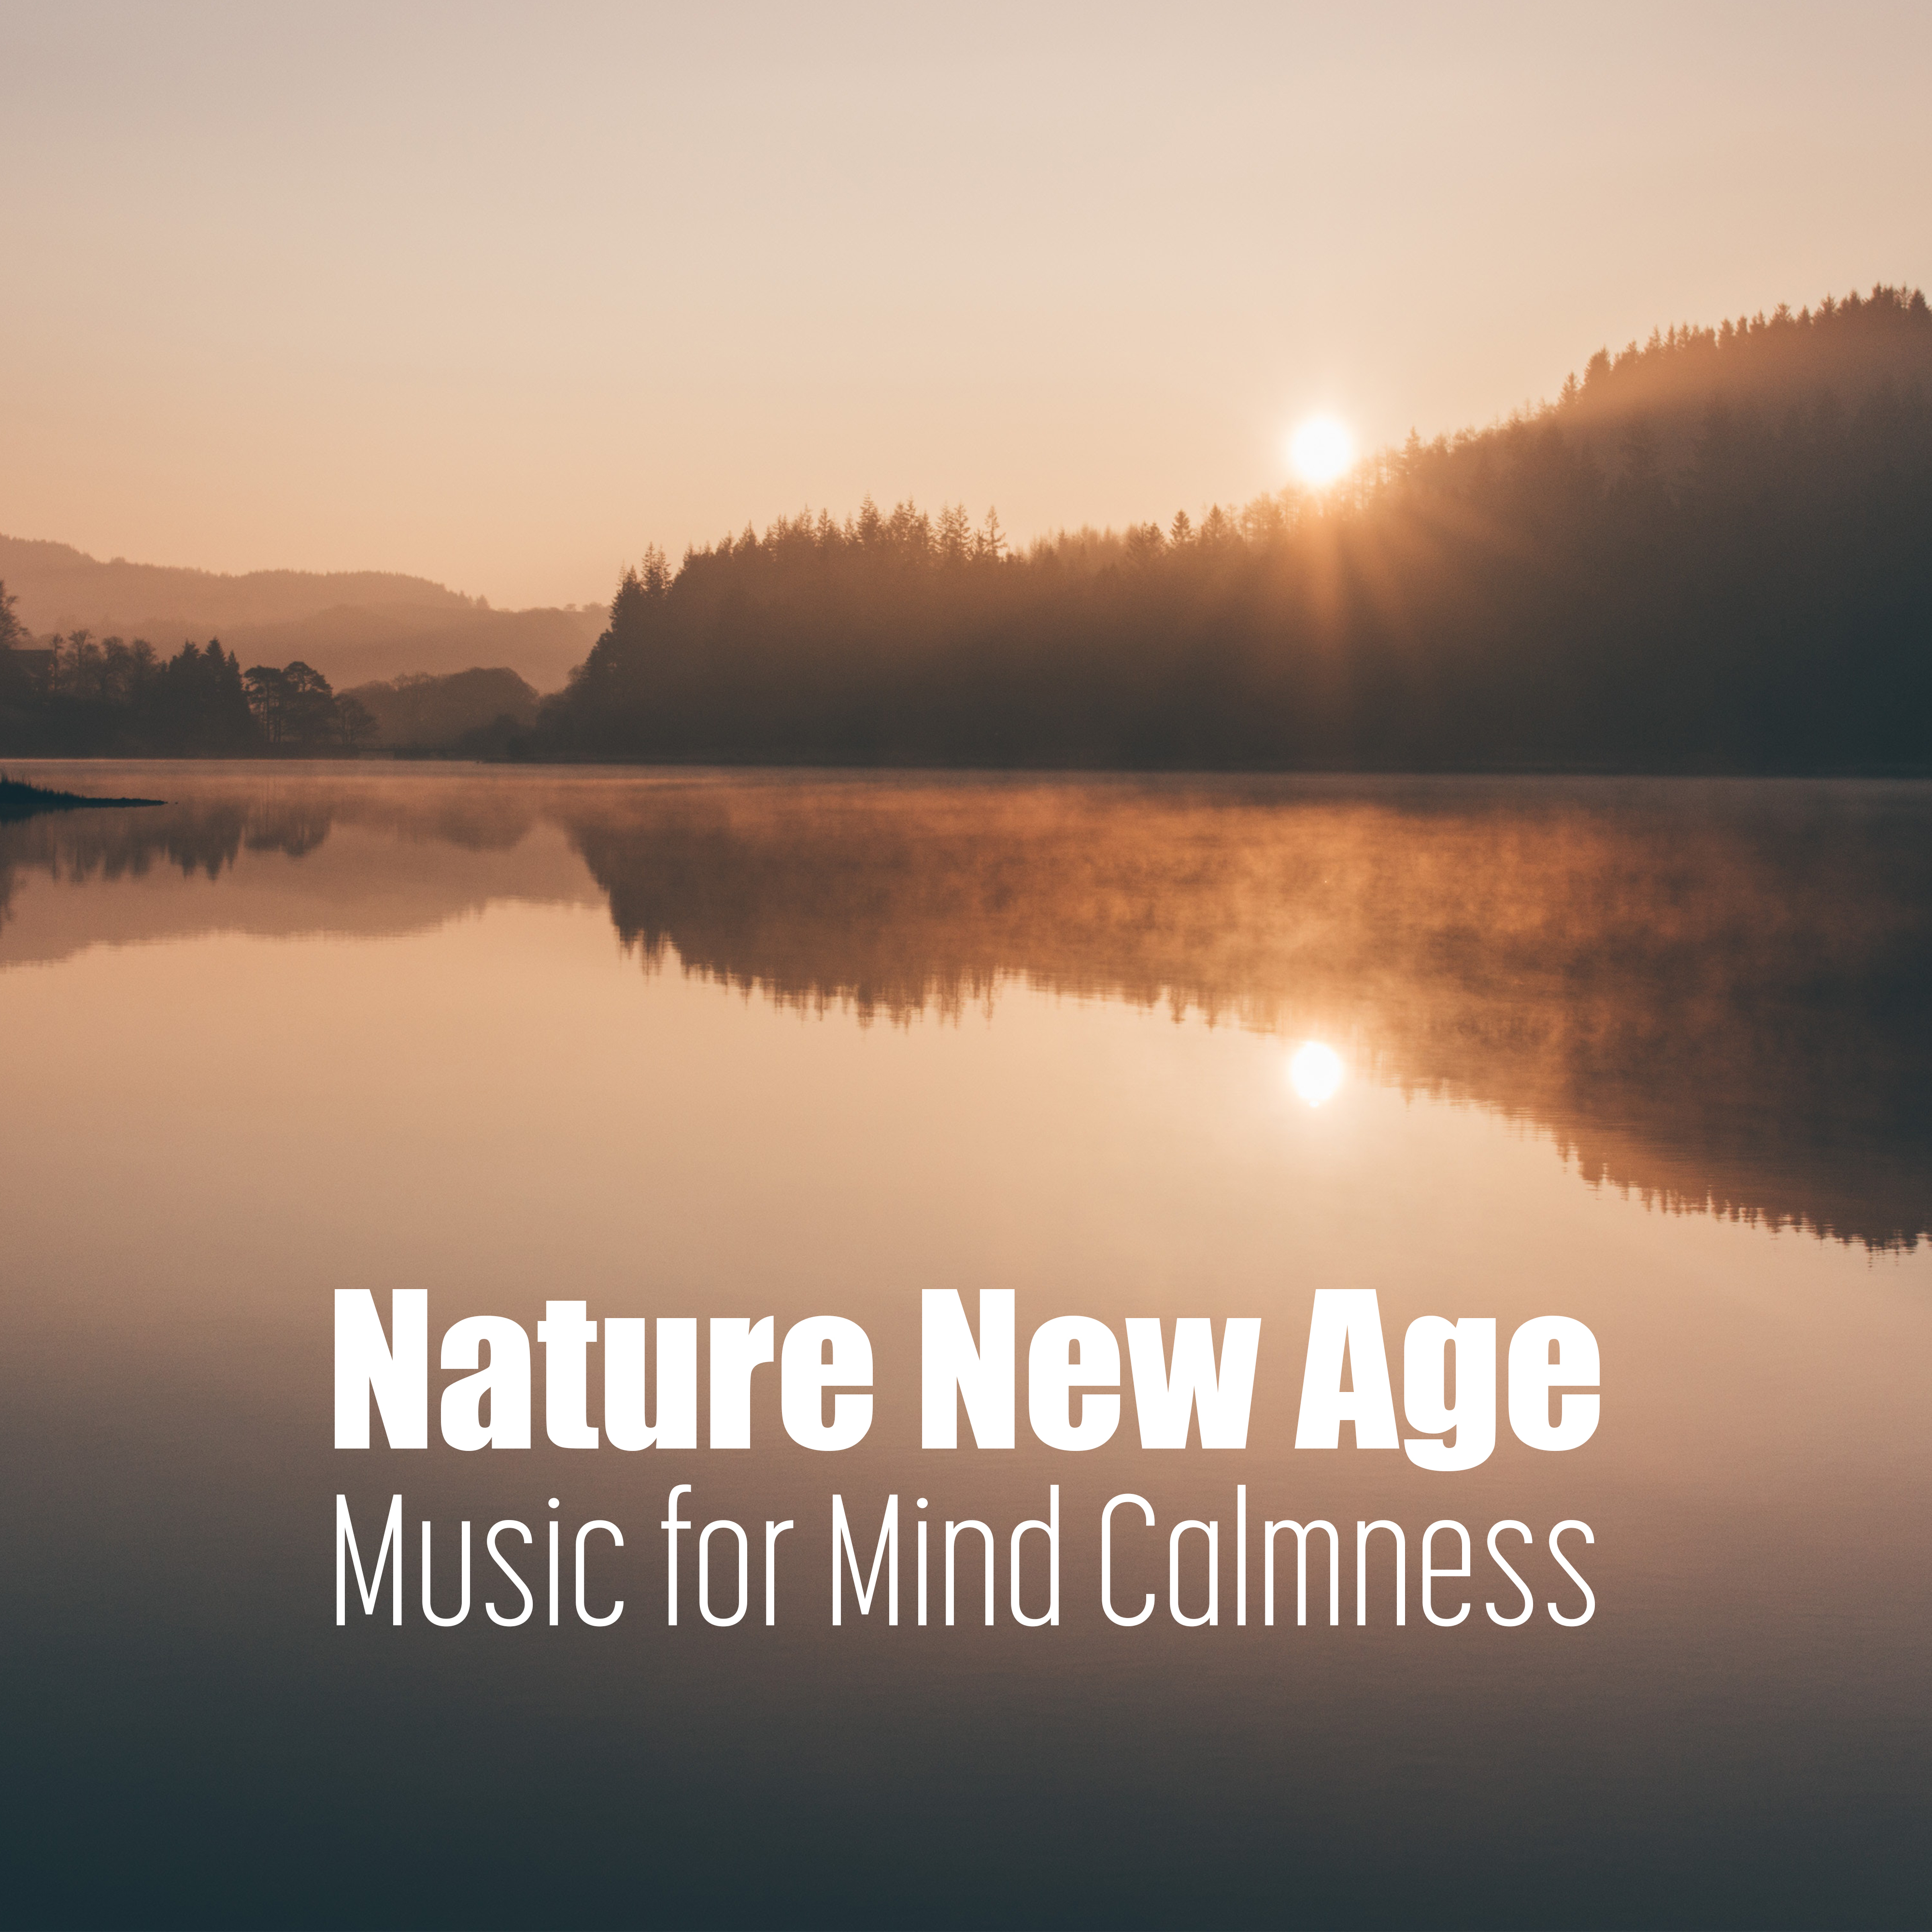 Nature New Age Music for Mind Calmness